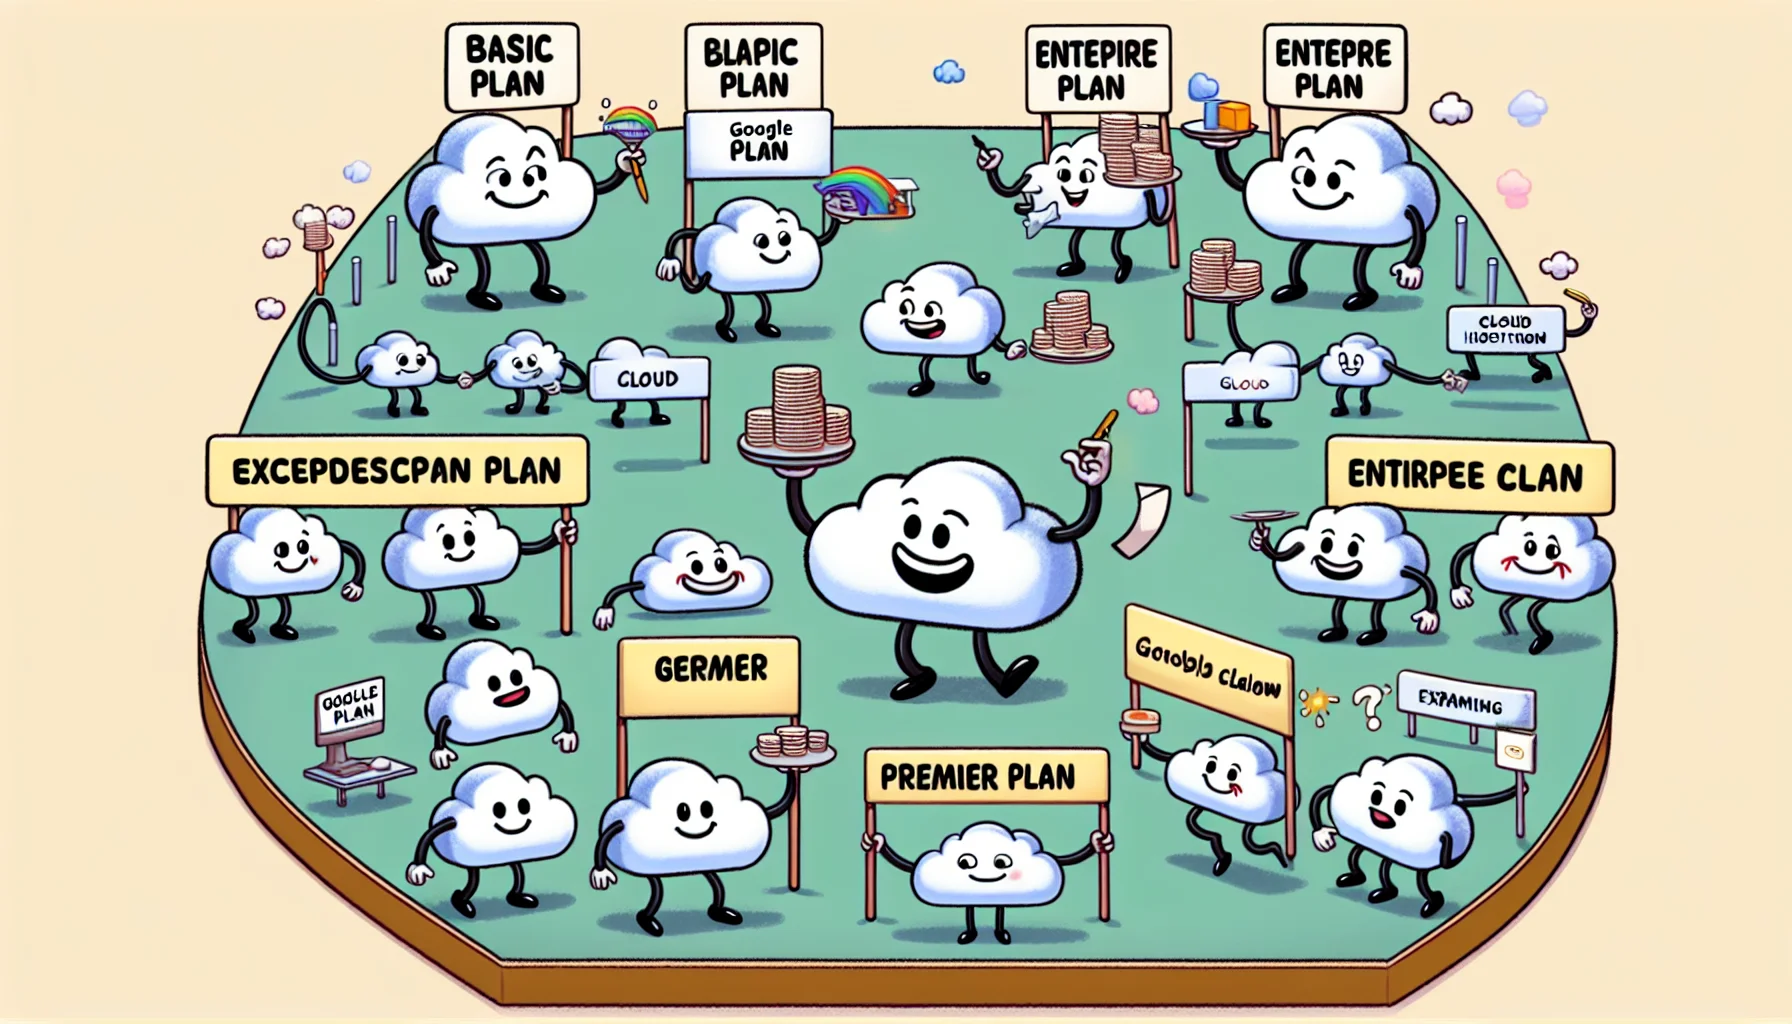 Picture an amusing scene where a group of cartoon clouds, each marked with a label for different Google Cloud hosting plans, appear to be hosting a friendly competition. A Basic Plan cloud, an Enterprise Plan cloud, and a Premier Plan cloud are all engaged in activities reflective of their plan's features. The Basic Plan cloud is managing simple tasks with a smile, the Enterprise Plan cloud is performing complex tasks with finesse, and the Premier Plan cloud is going the extra mile, juggling numerous complex tasks, all with a big grin on its face, indicating exceptional service and capabilities.